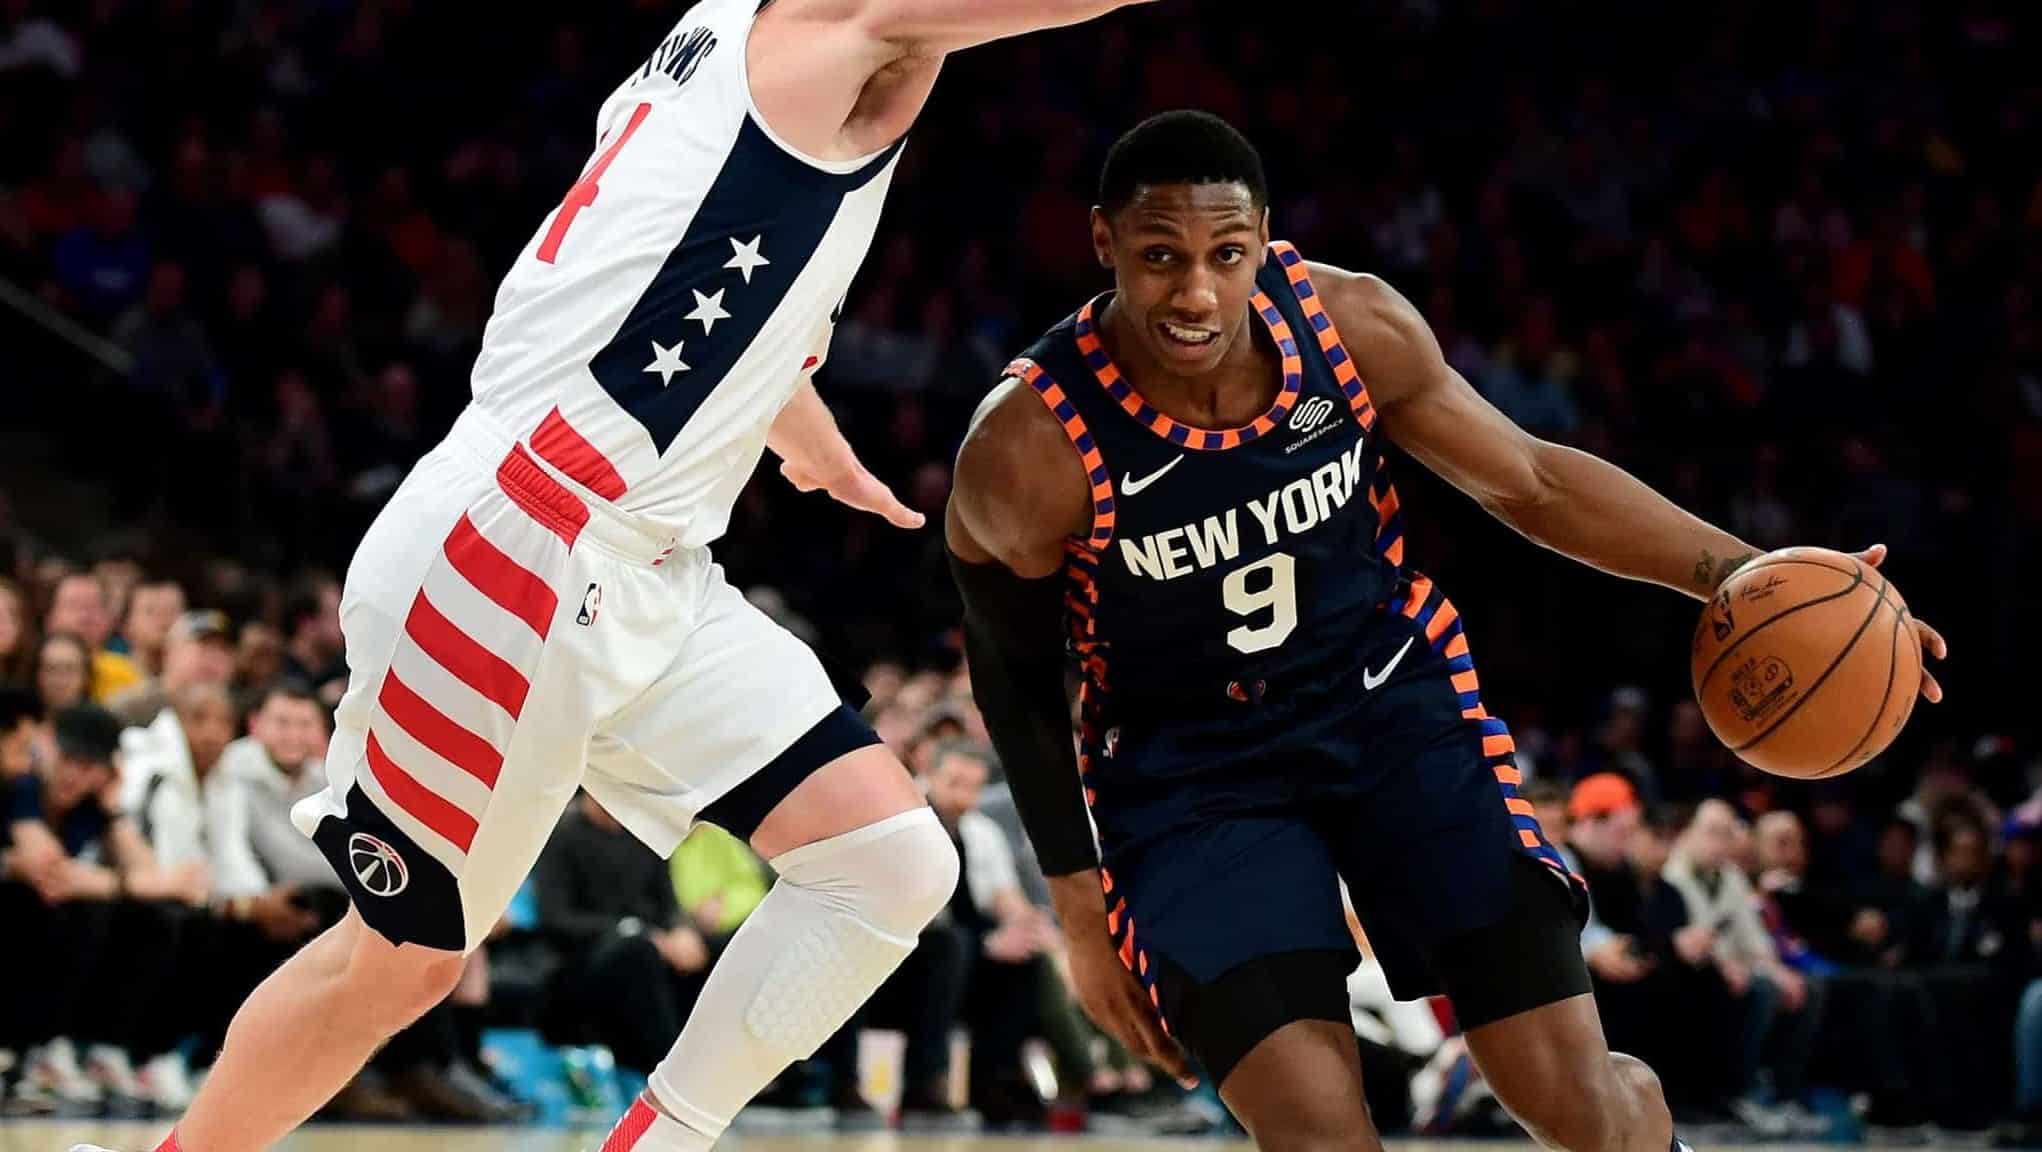 NEW YORK, NEW YORK - DECEMBER 23: RJ Barrett #9 of the New York Knicks drives past Garrison Mathews #24 of the Washington Wizards during the second half of their game at Madison Square Garden on December 23, 2019 in New York City. NOTE TO USER: User expressly acknowledges and agrees that, by downloading and or using this photograph, User is consenting to the terms and conditions of the Getty Images License Agreement.